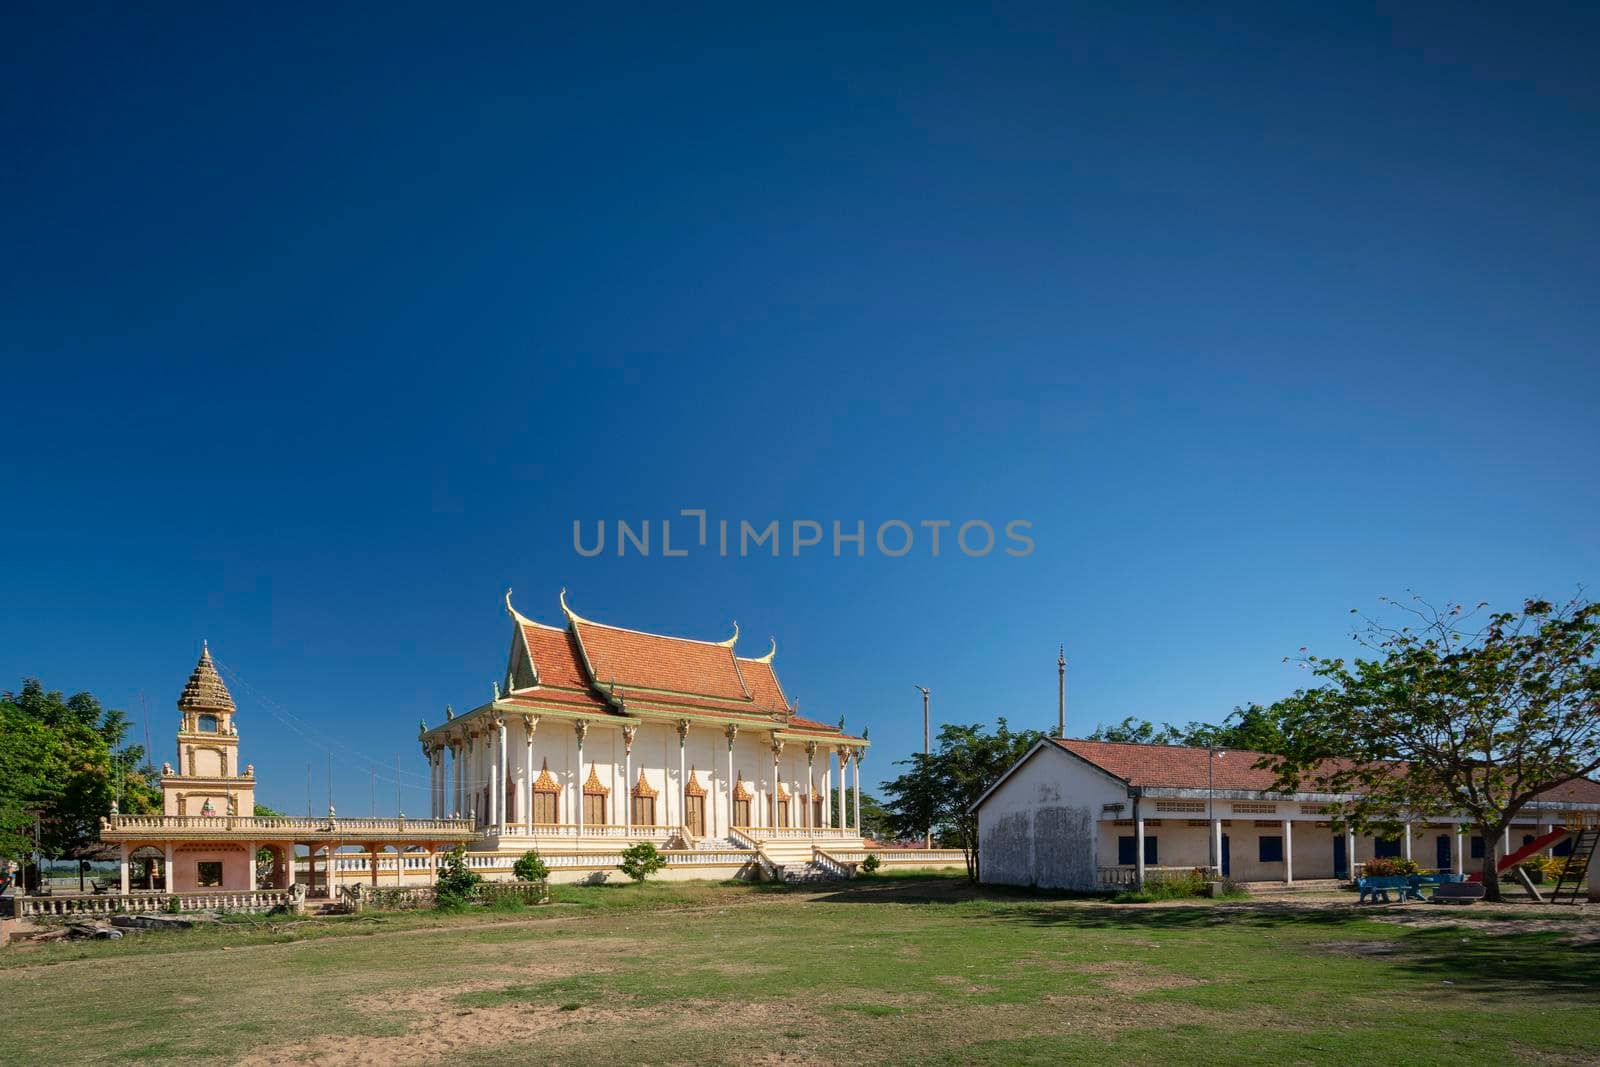 Wat Svay Andet Pagoda of Lakhon Khol Dance Unesco Intangible Cultural Heritage site in Kandal province near Phnom Penh Cambodia